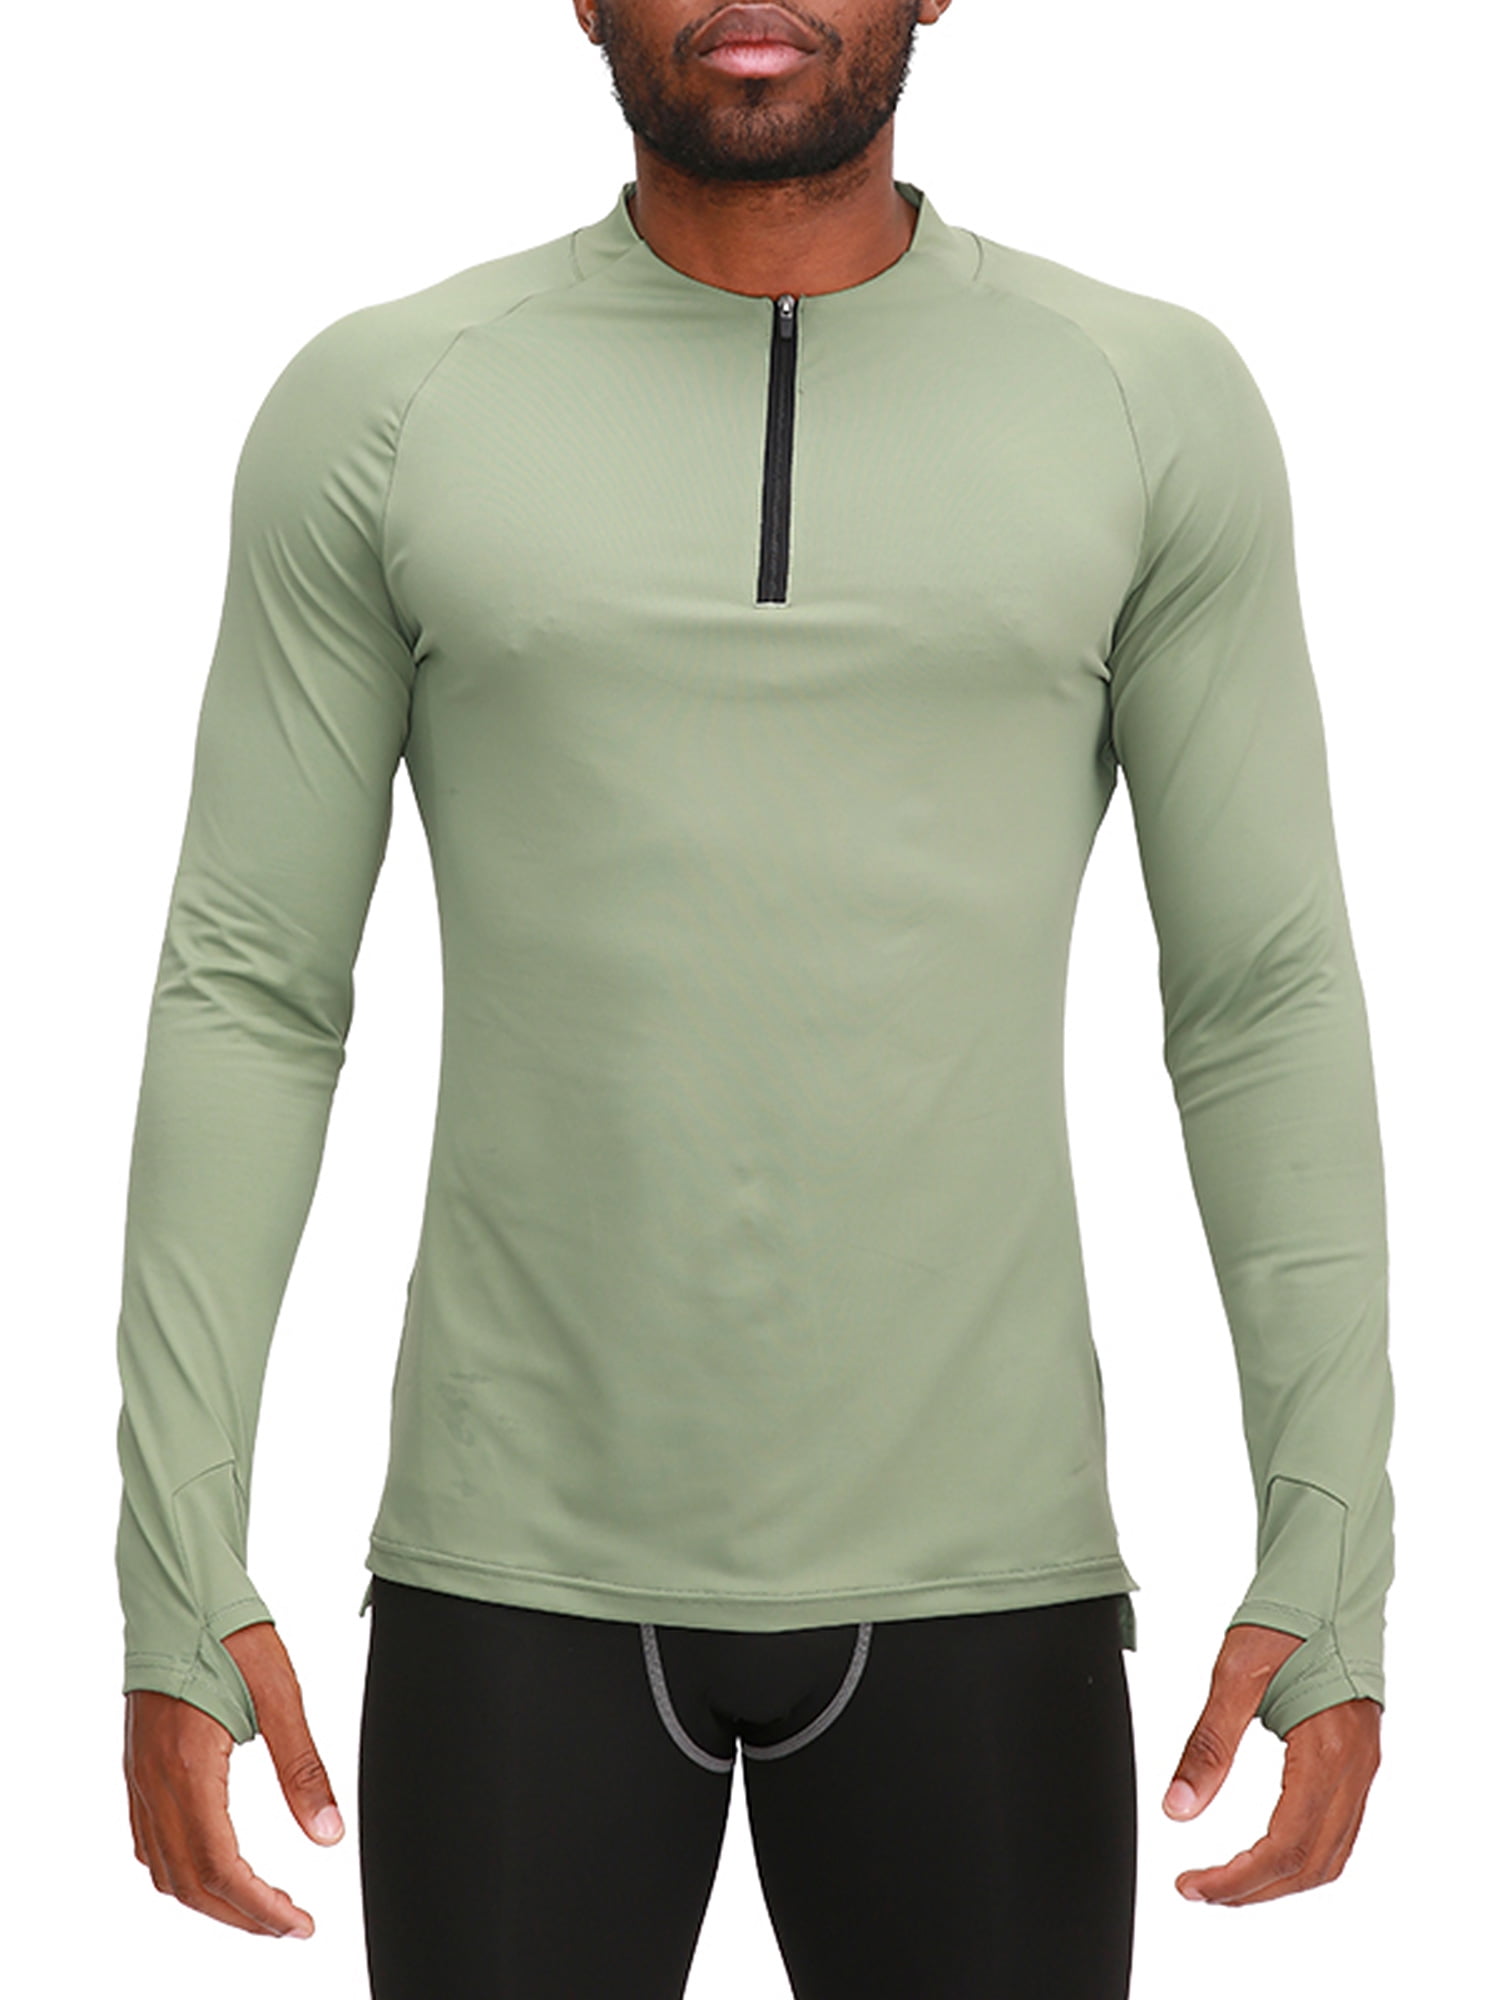 hower Men Casual Fashion 1/4 Zip Athletic Pullover Long Sleeve Dry Fit Running Active Shirts